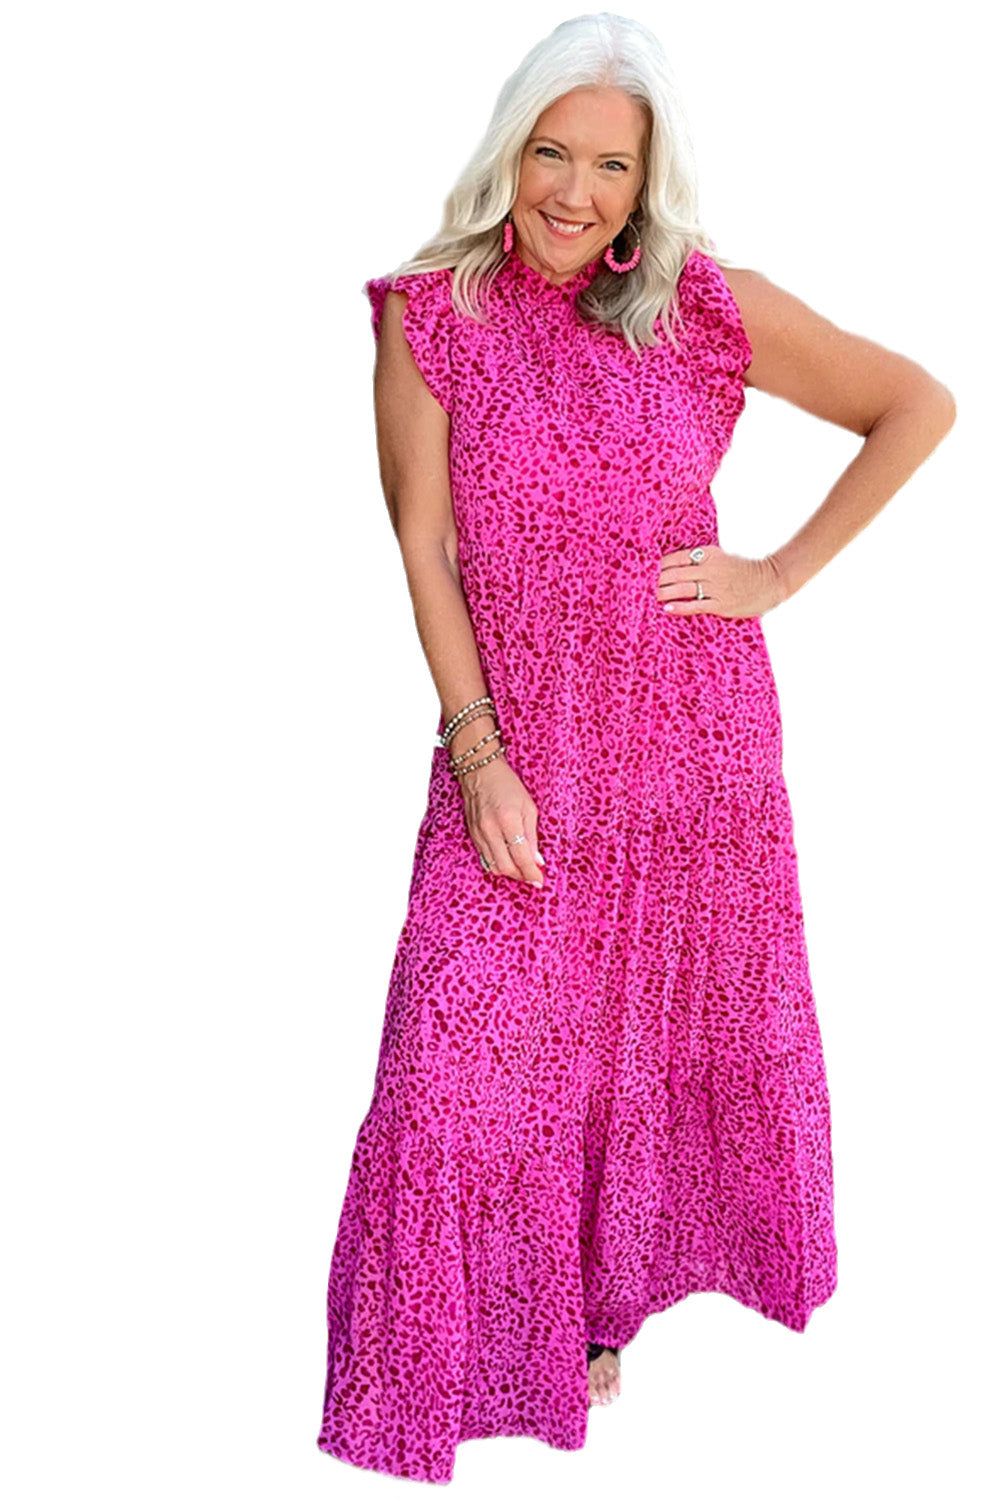 Blue Zone Planet |  Rose Red Leopard Print Ruffled Trim Tiered Maxi Dress Blue Zone Planet